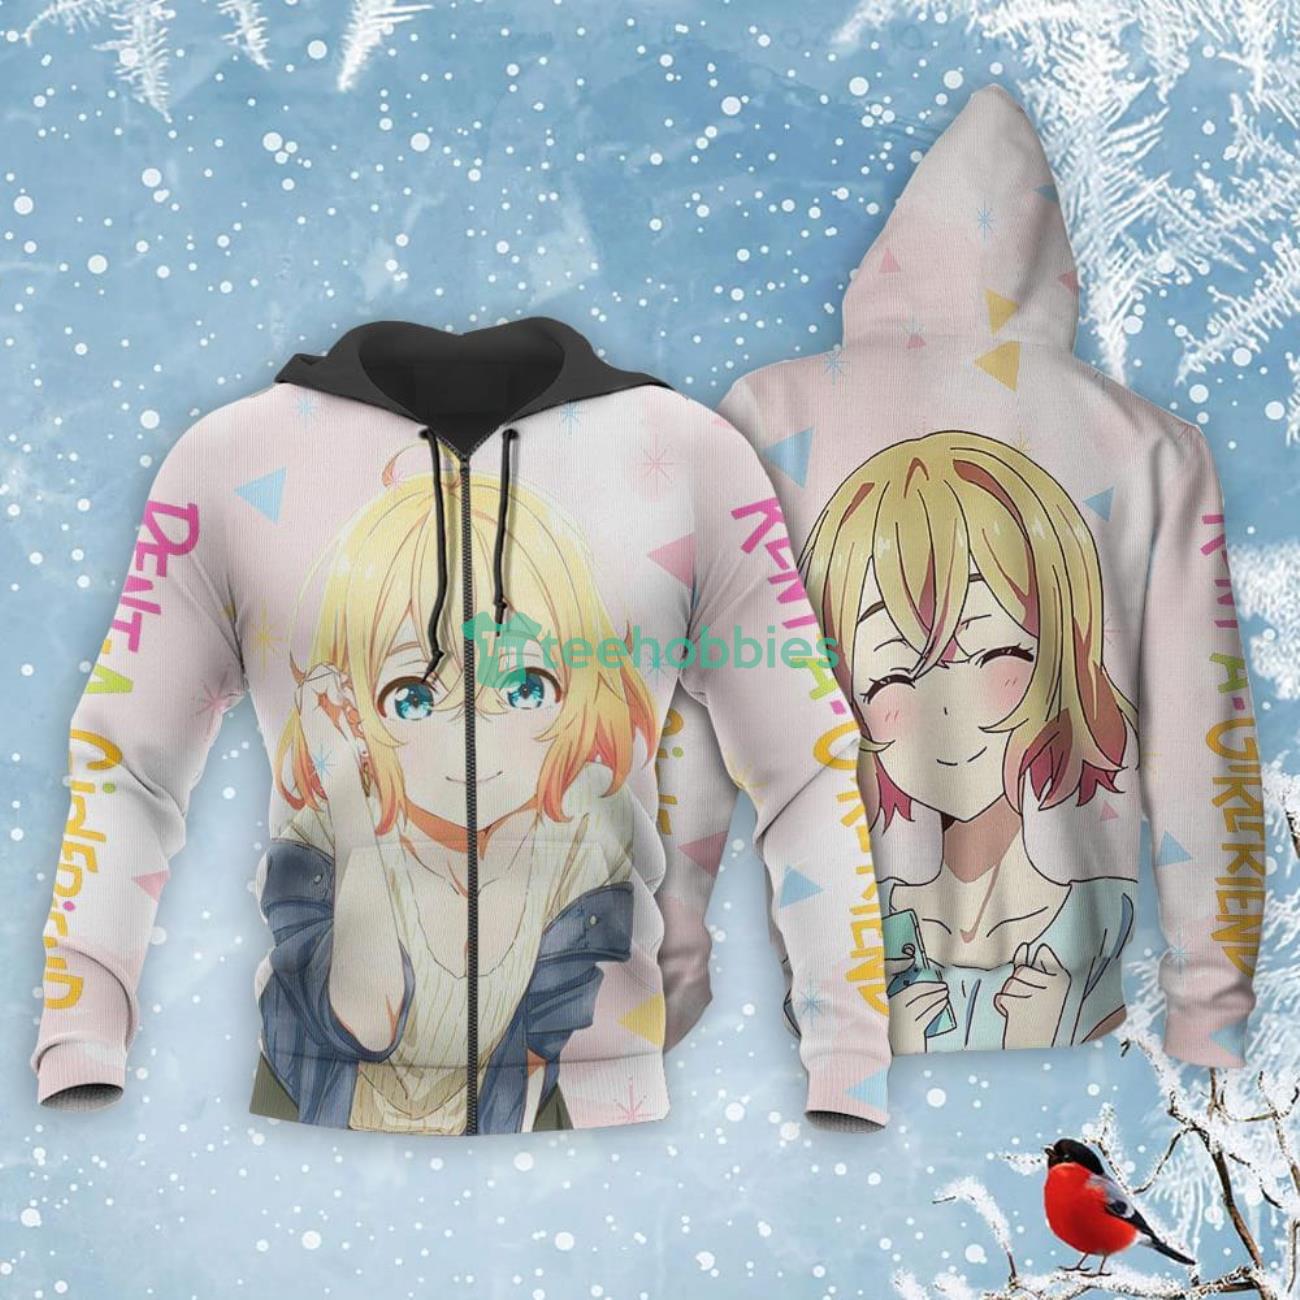 Rent A Girlfriend Mami Nanami All Over Printed 3D Shirt Anime Fans Product Photo 1 Product photo 1